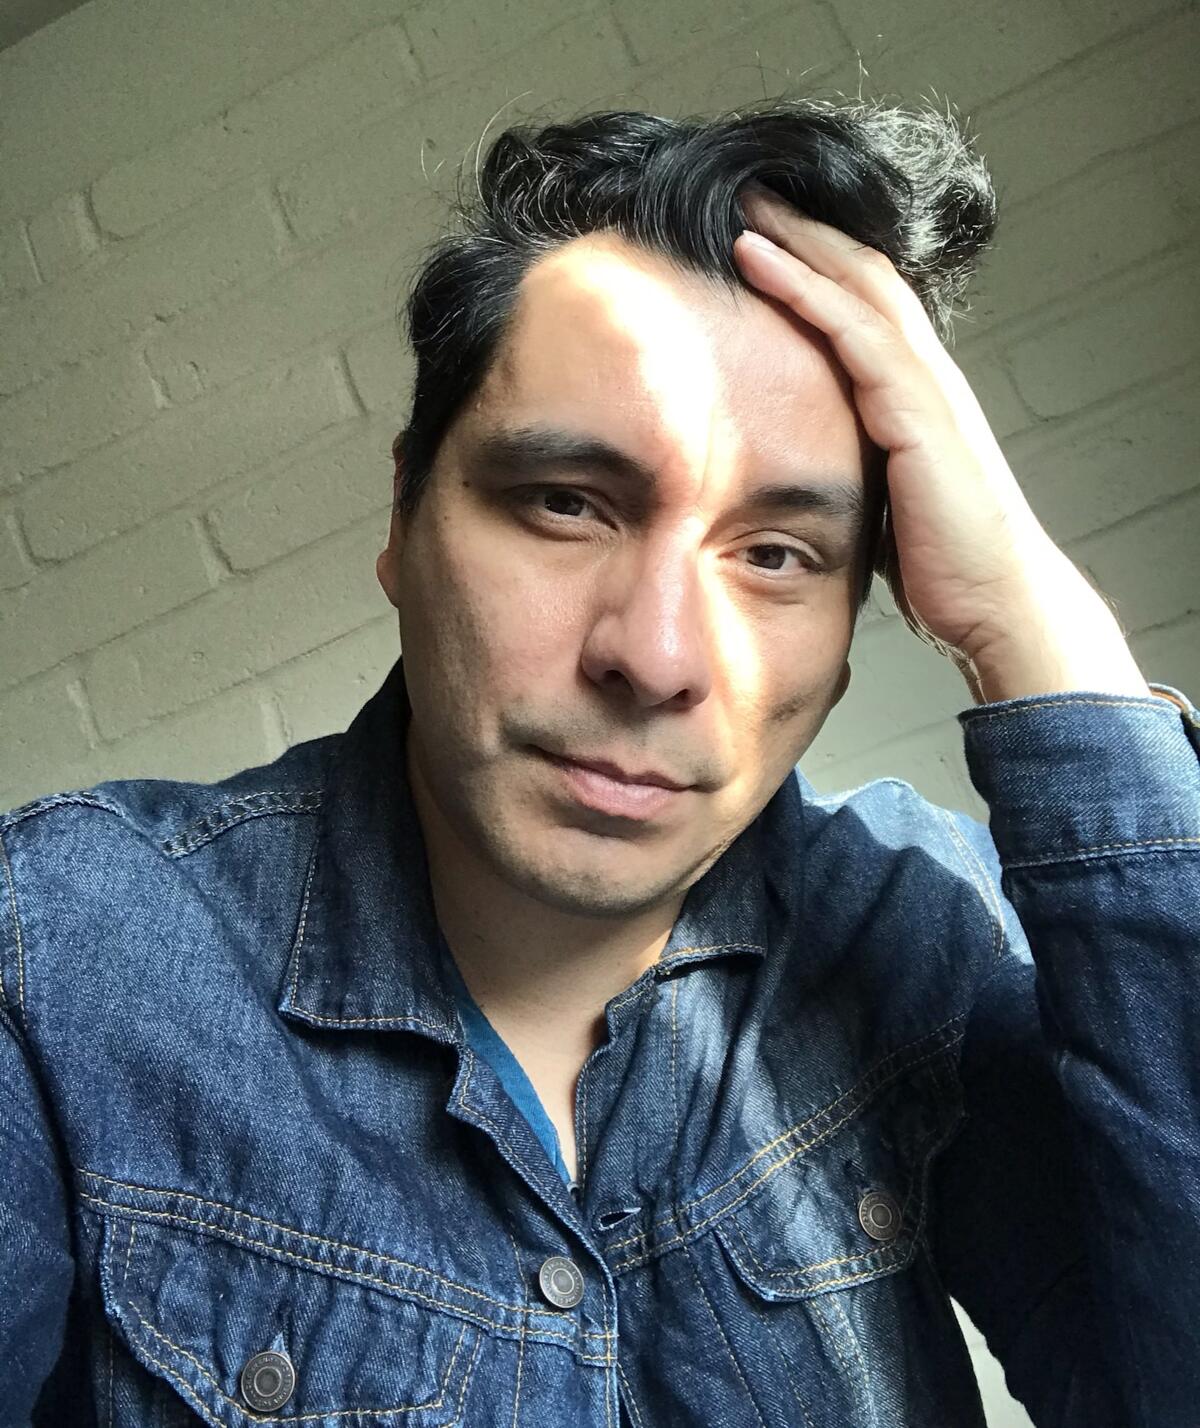 Manuel Muñoz, wearing a denim shirt, holds his head in his hand while seated before a white brick wall.